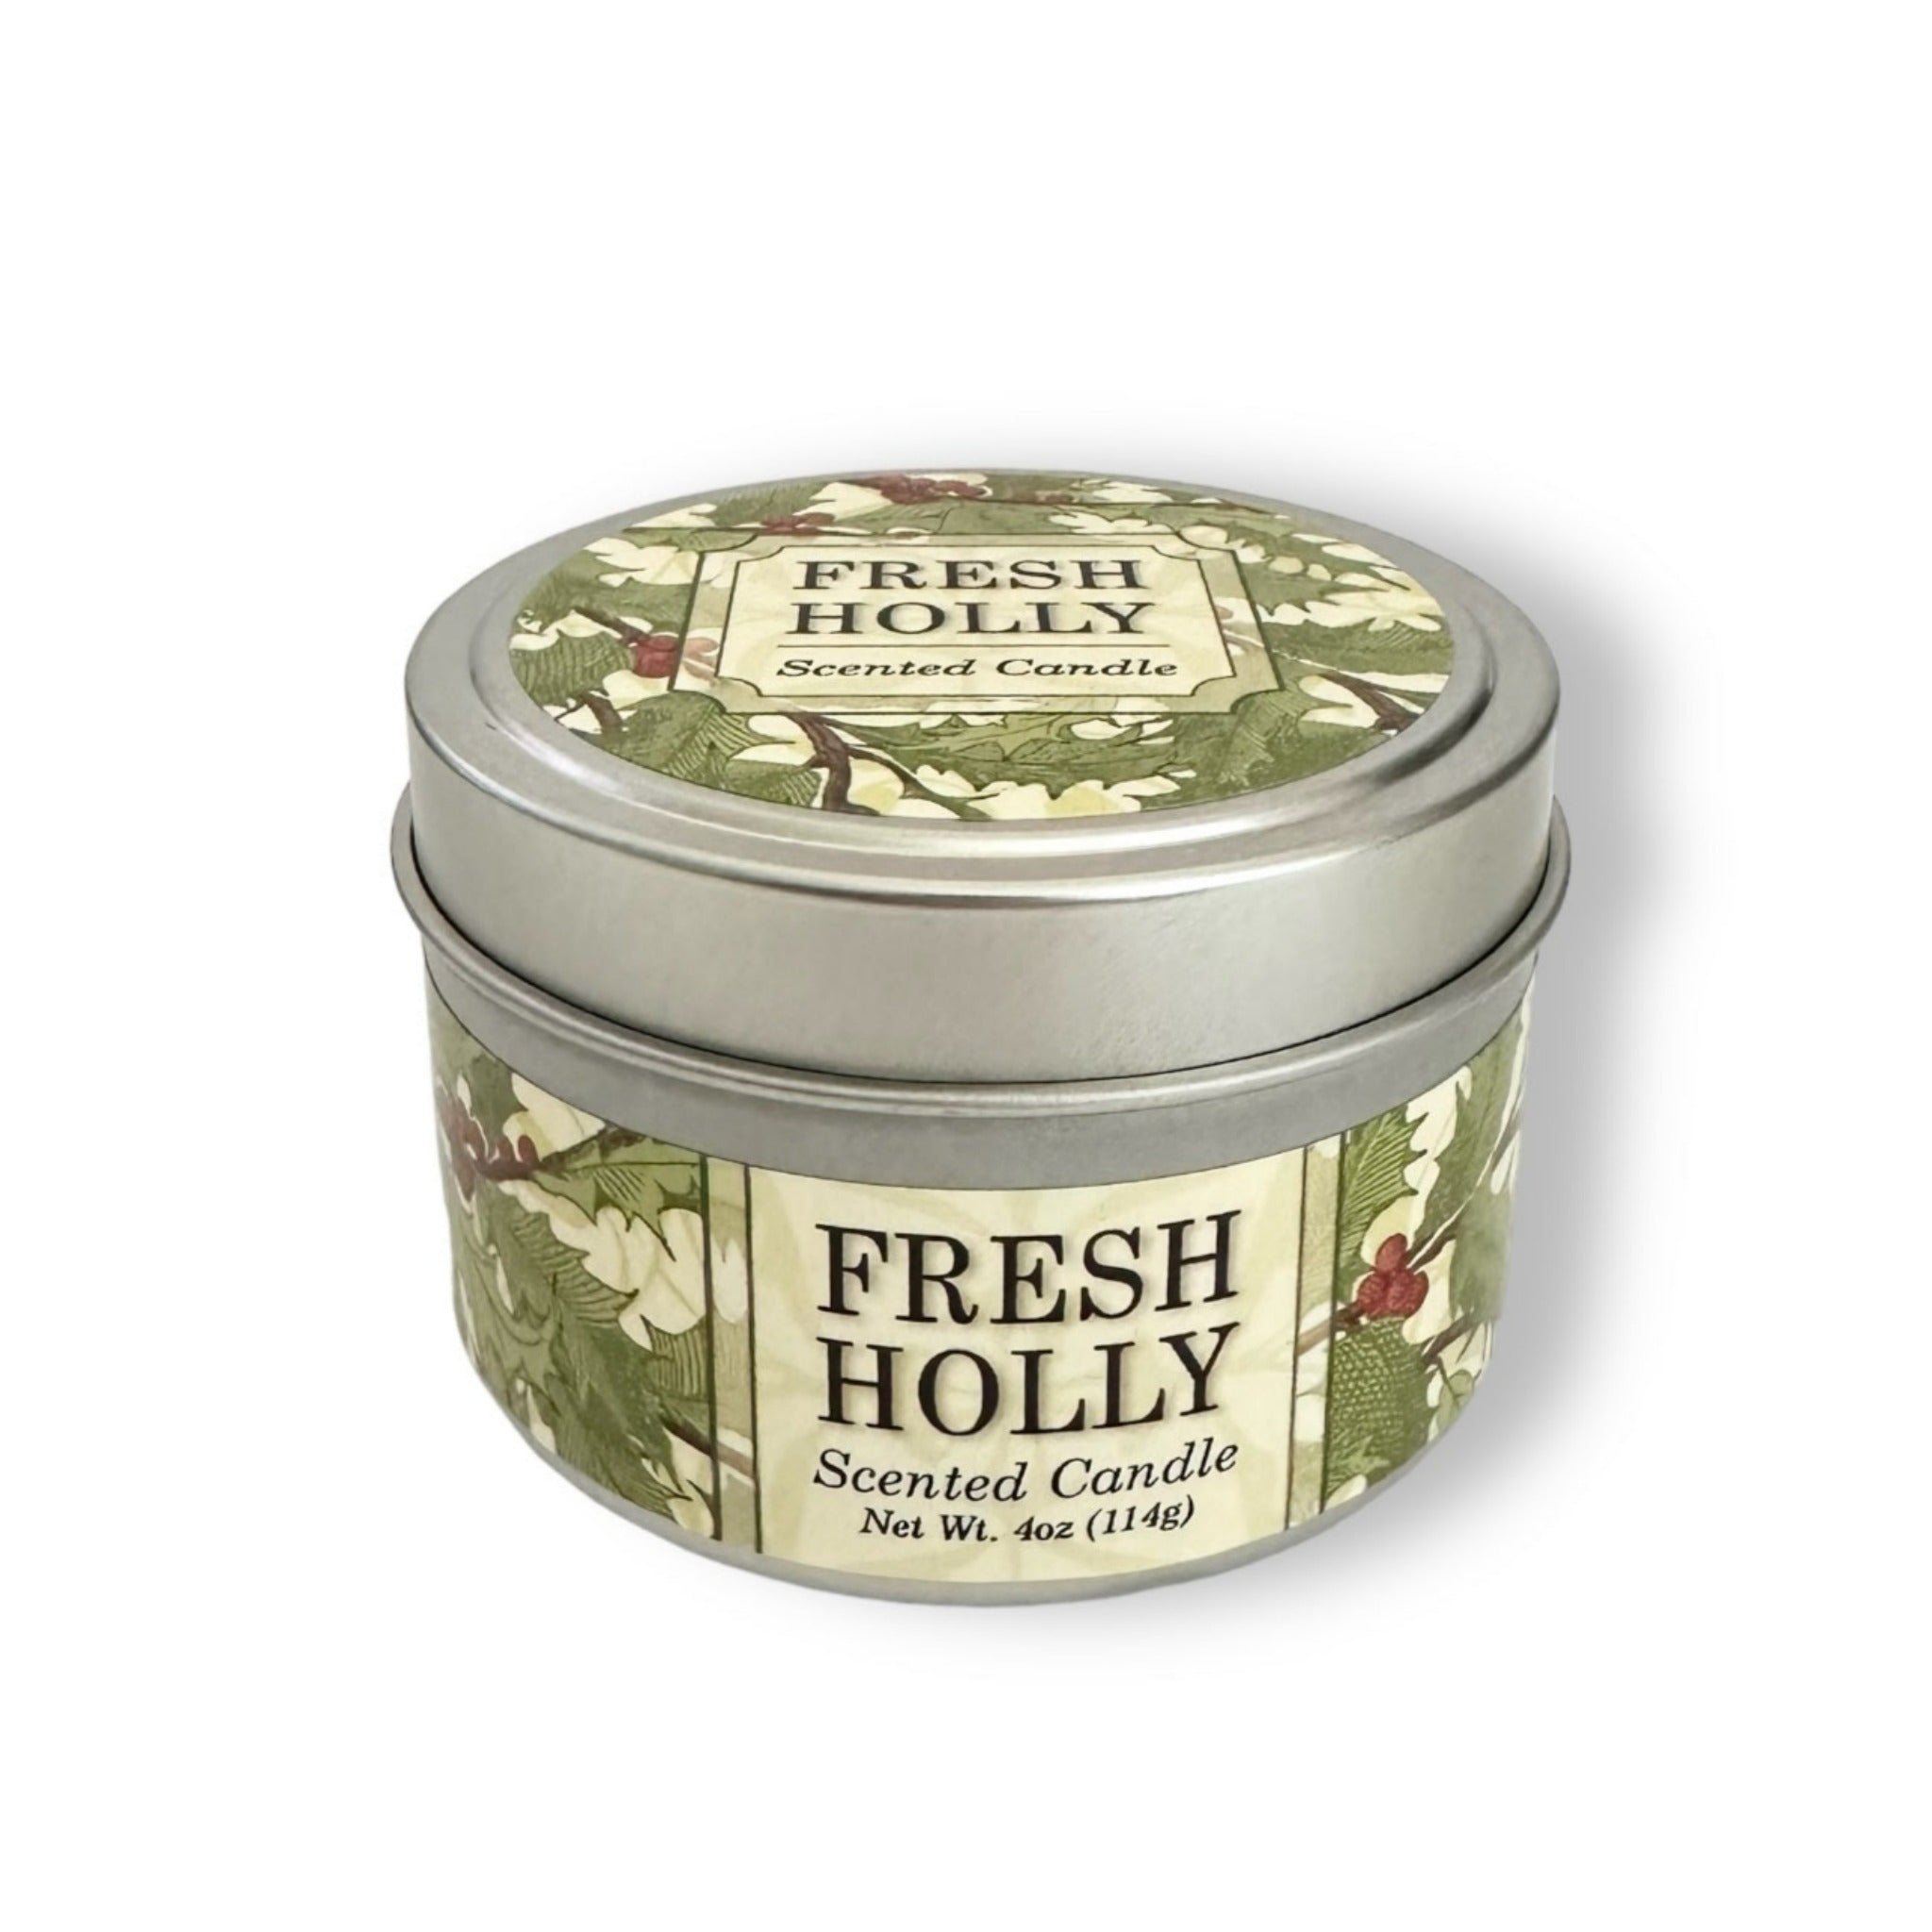 Greenwich Bay Trading Company Fresh Holly Candle